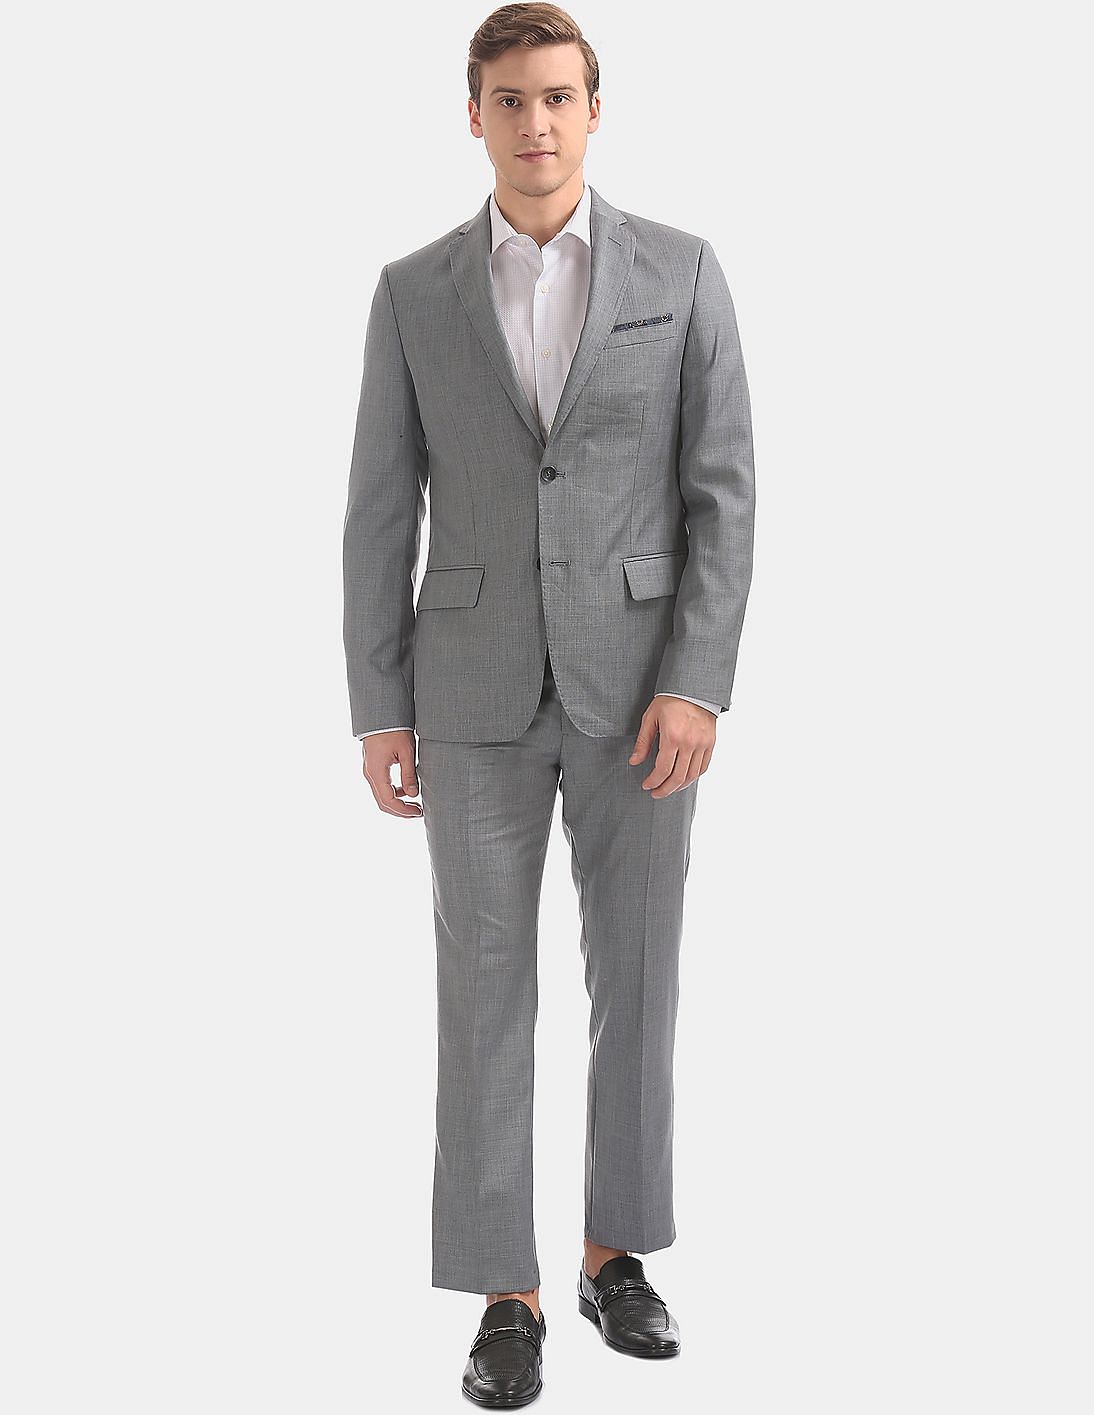 Buy AD by Arvind Regular Fit Single Breasted Suit - NNNOW.com